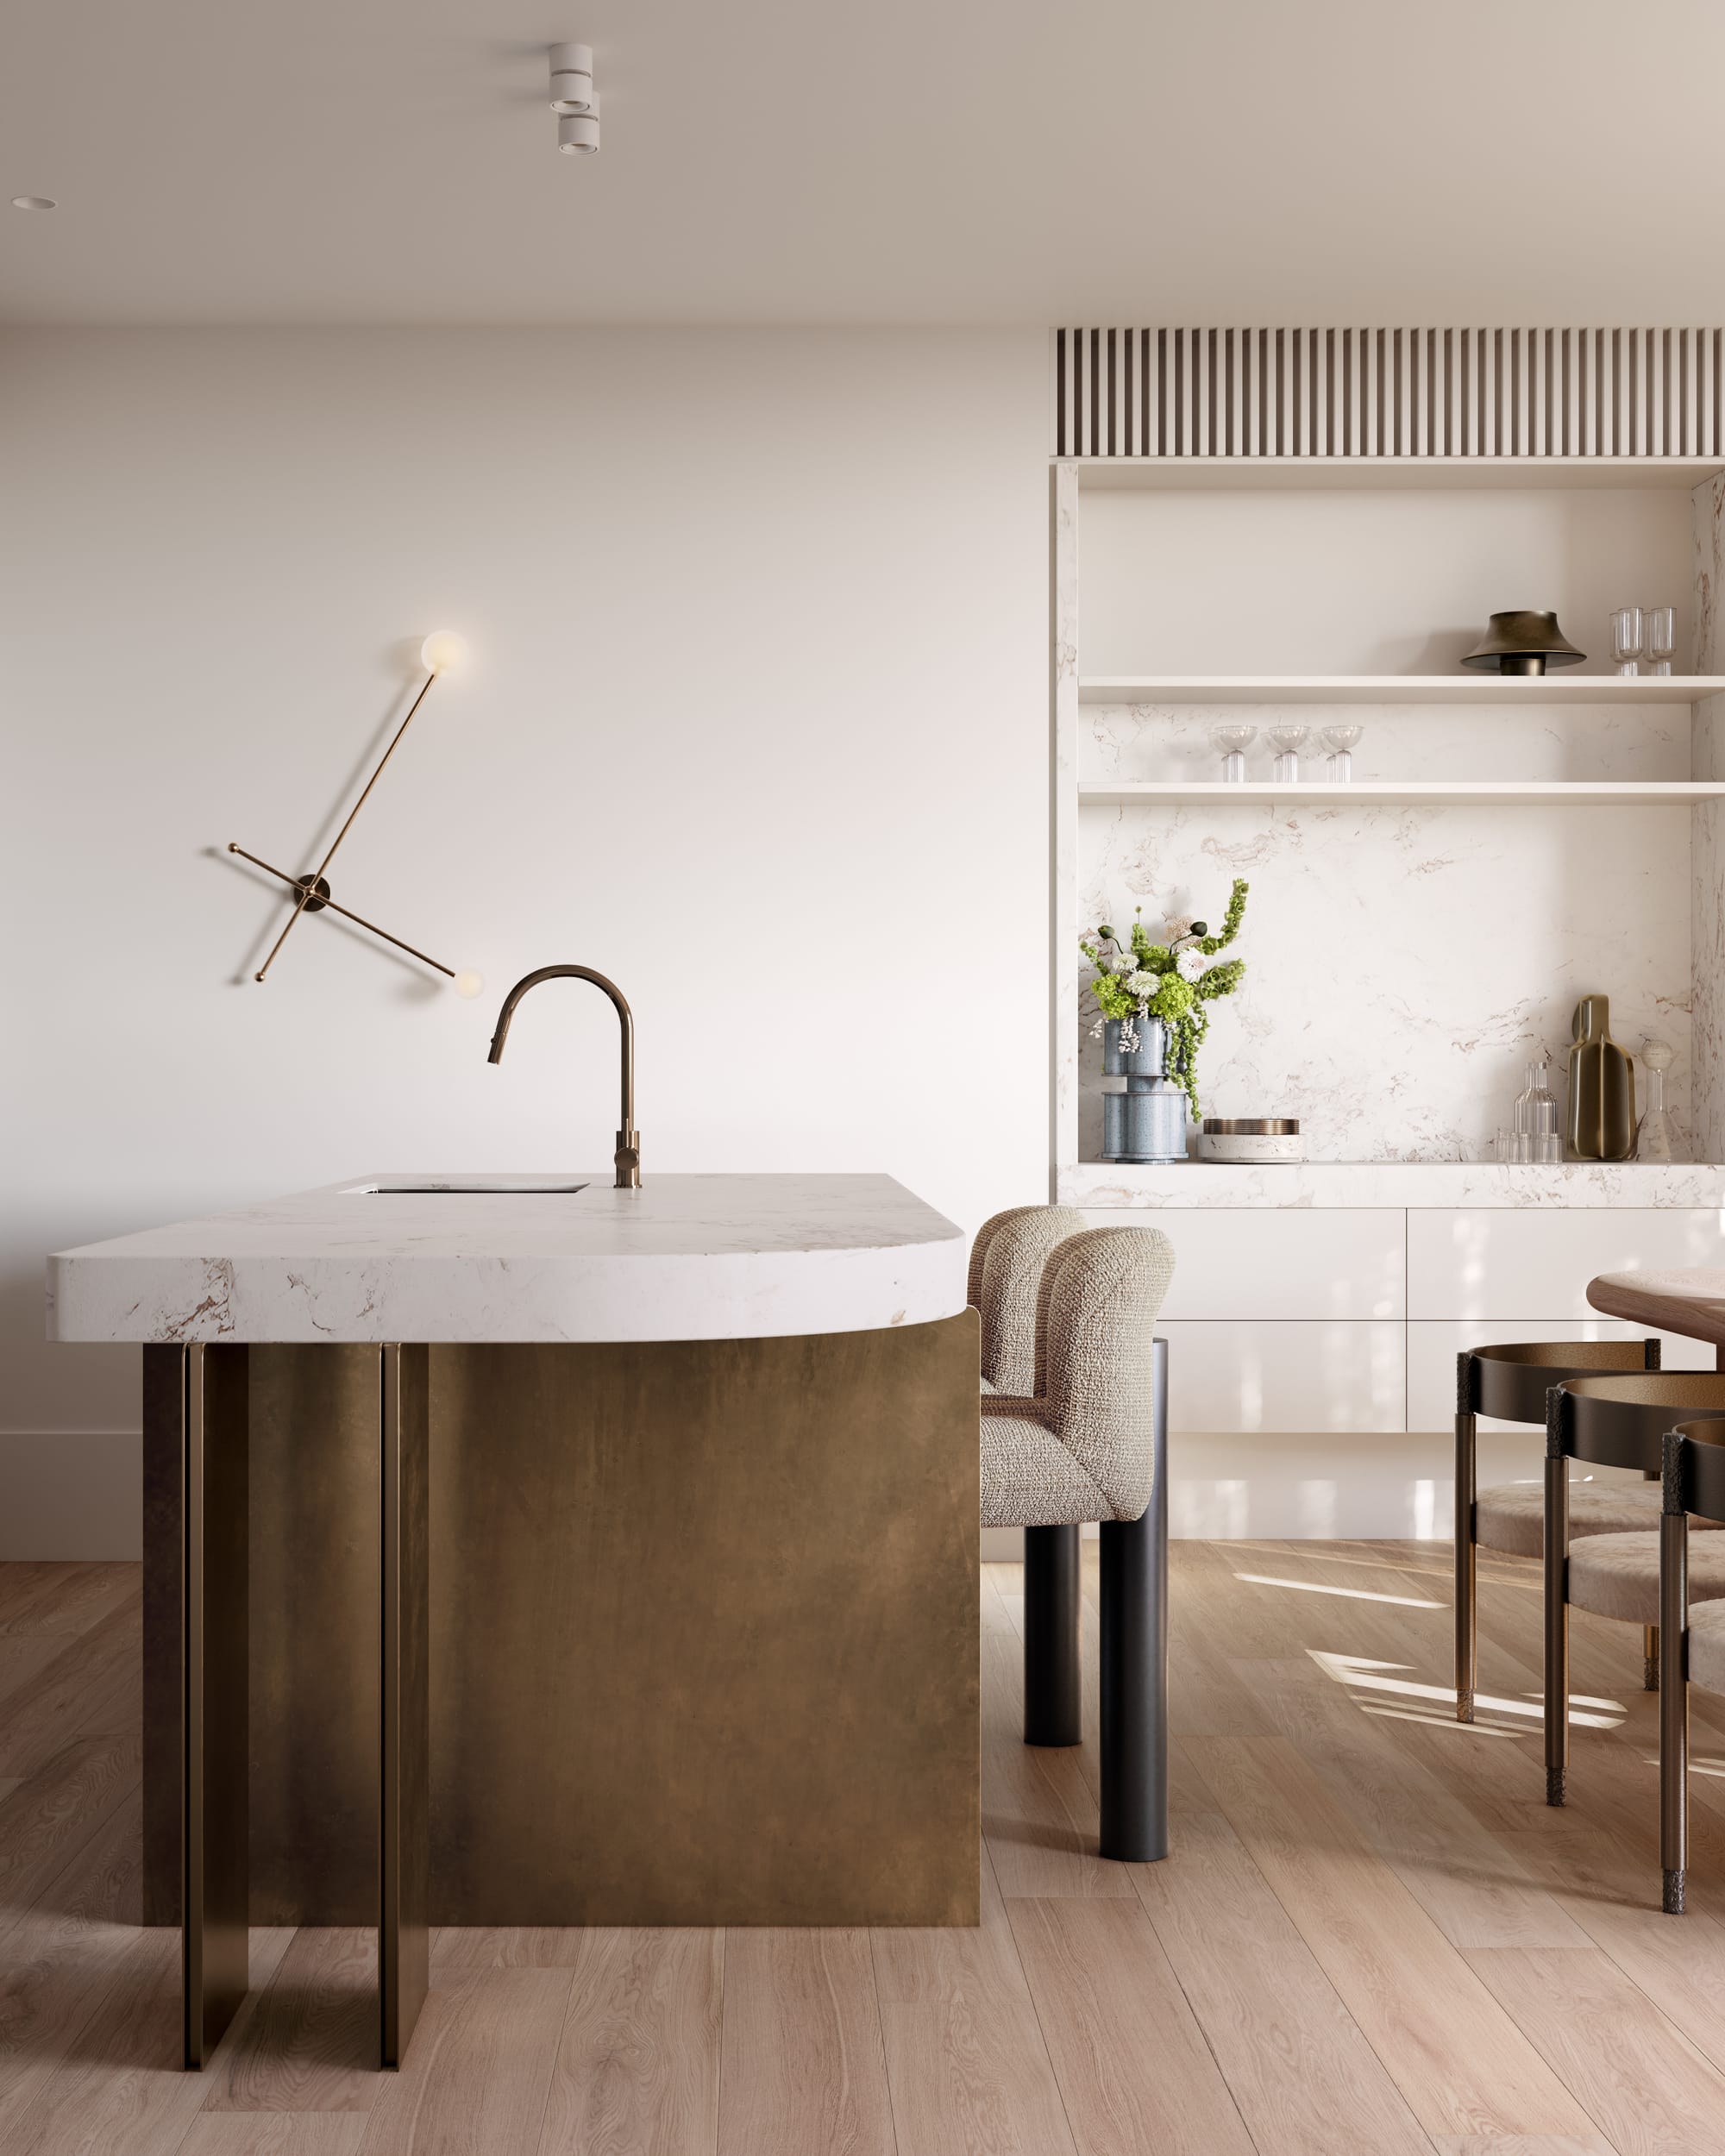 Sculpt Hawthorn by Mim Design, Parallel Workshop and Jack Merlo. Render copyright of Studio Piper. Kitchen with timber floors and stone and brass kitchen island. White and stone bar. White and black island stools. 